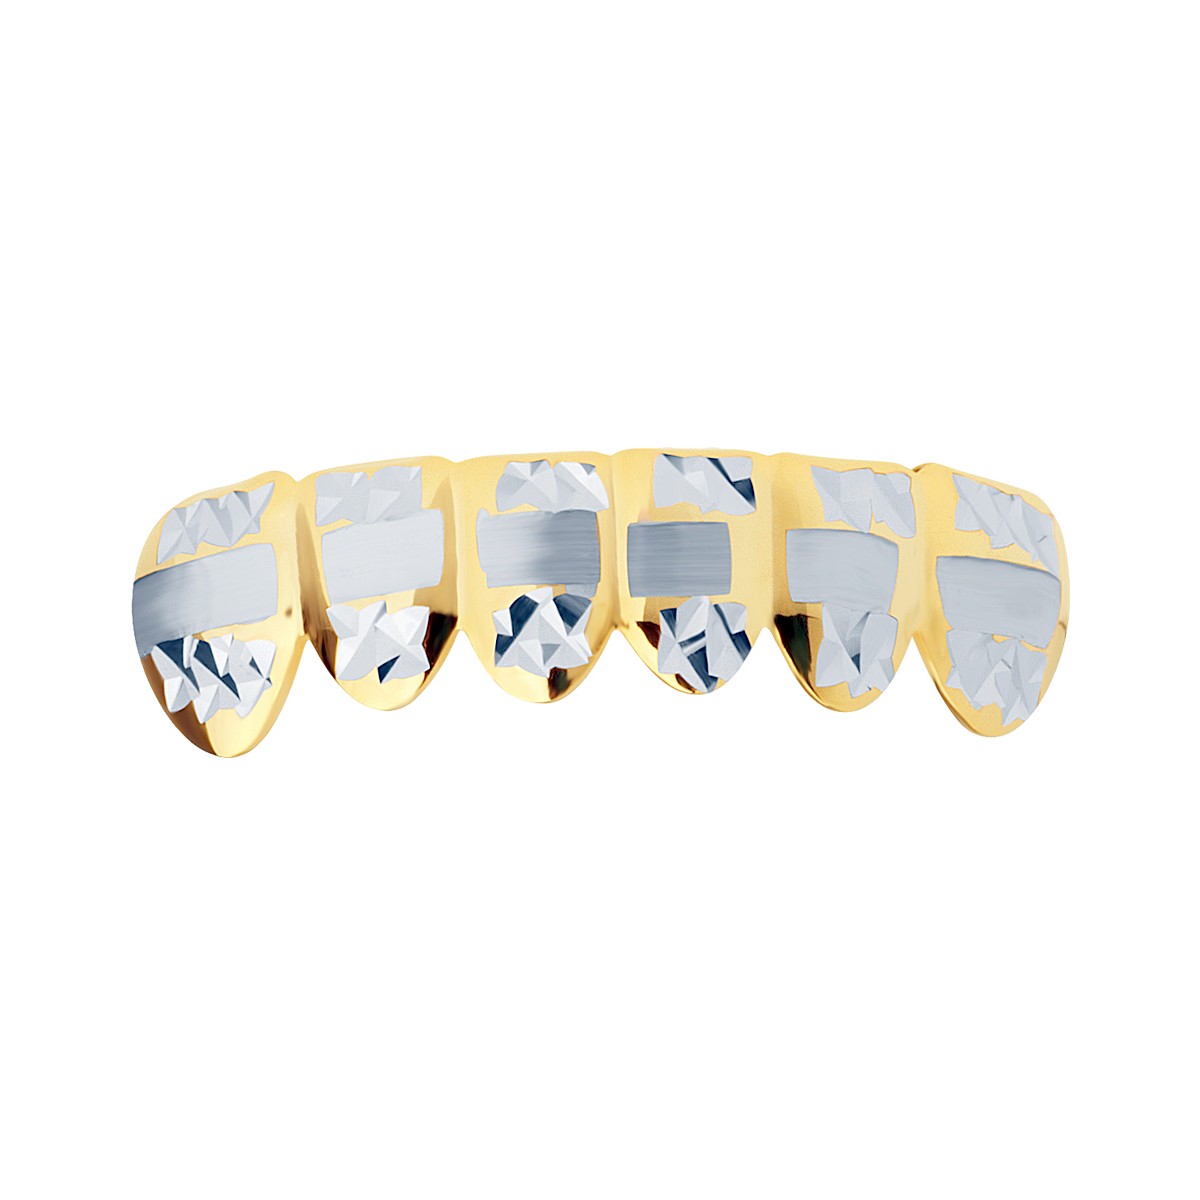 Grillz-oro bottom * one size fits all * 